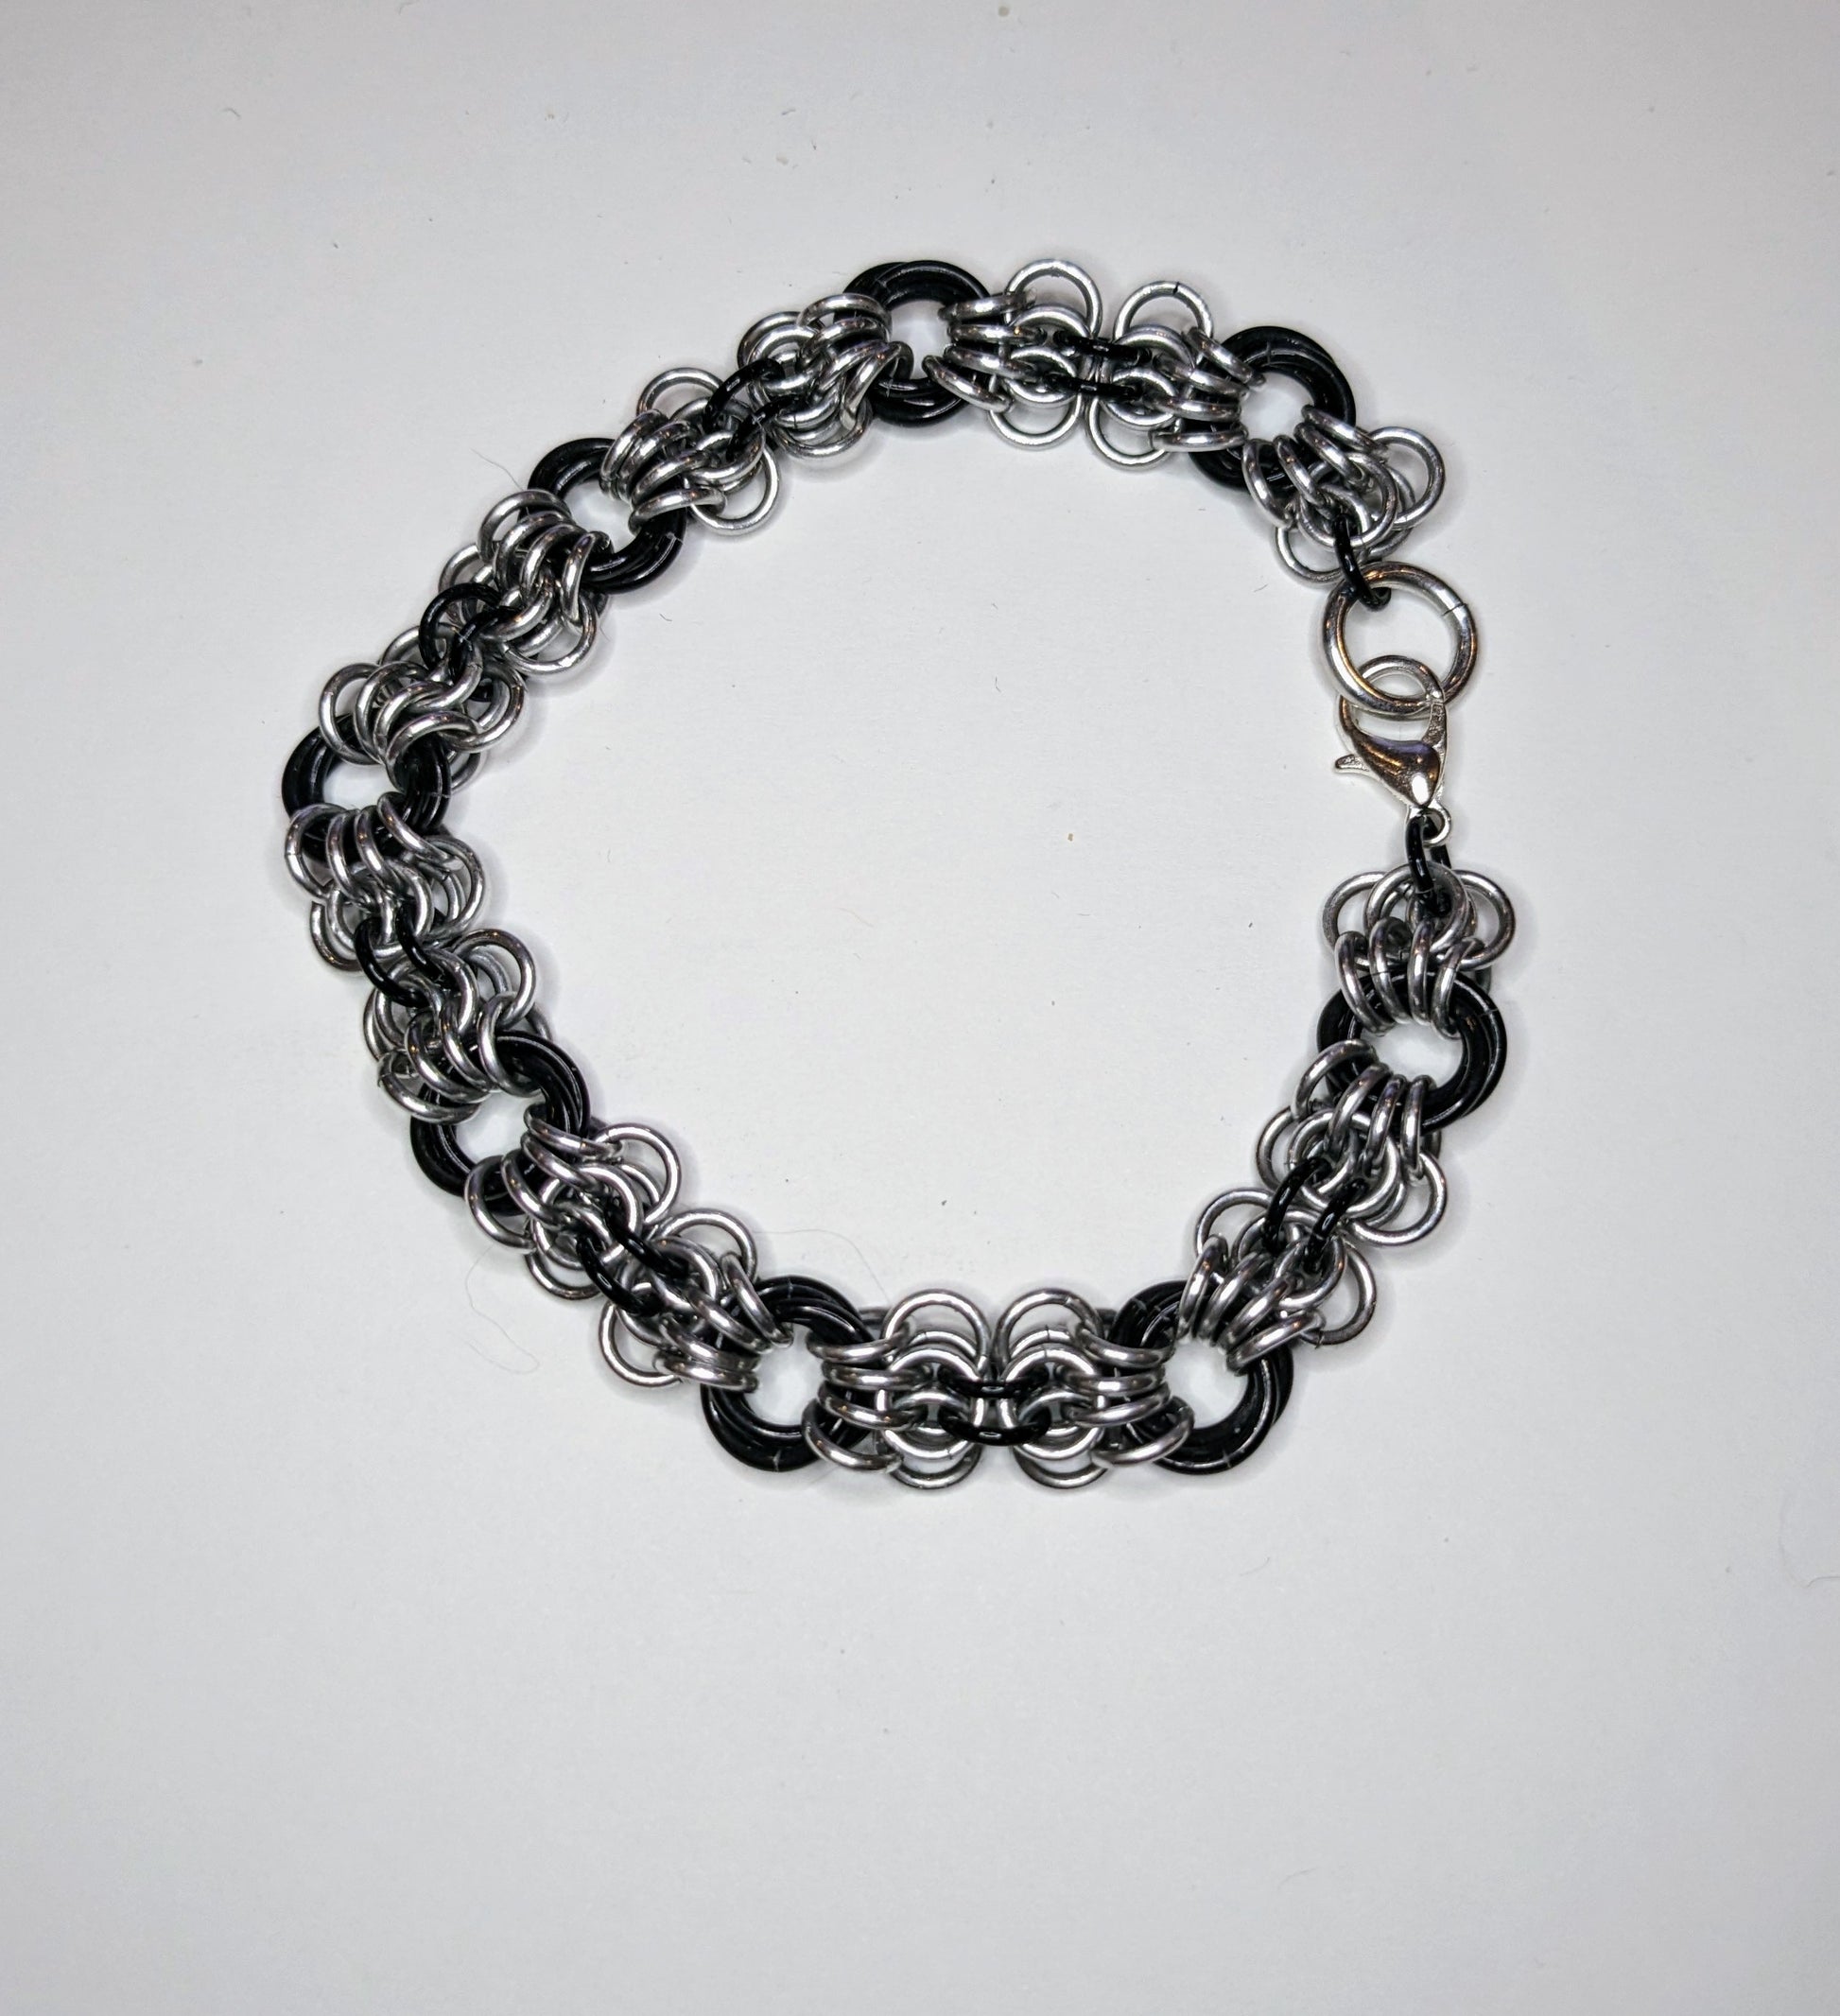 Silver and black butterfly weave chainmail bracelet on a white background.  Bracelet has a lobster clasp.